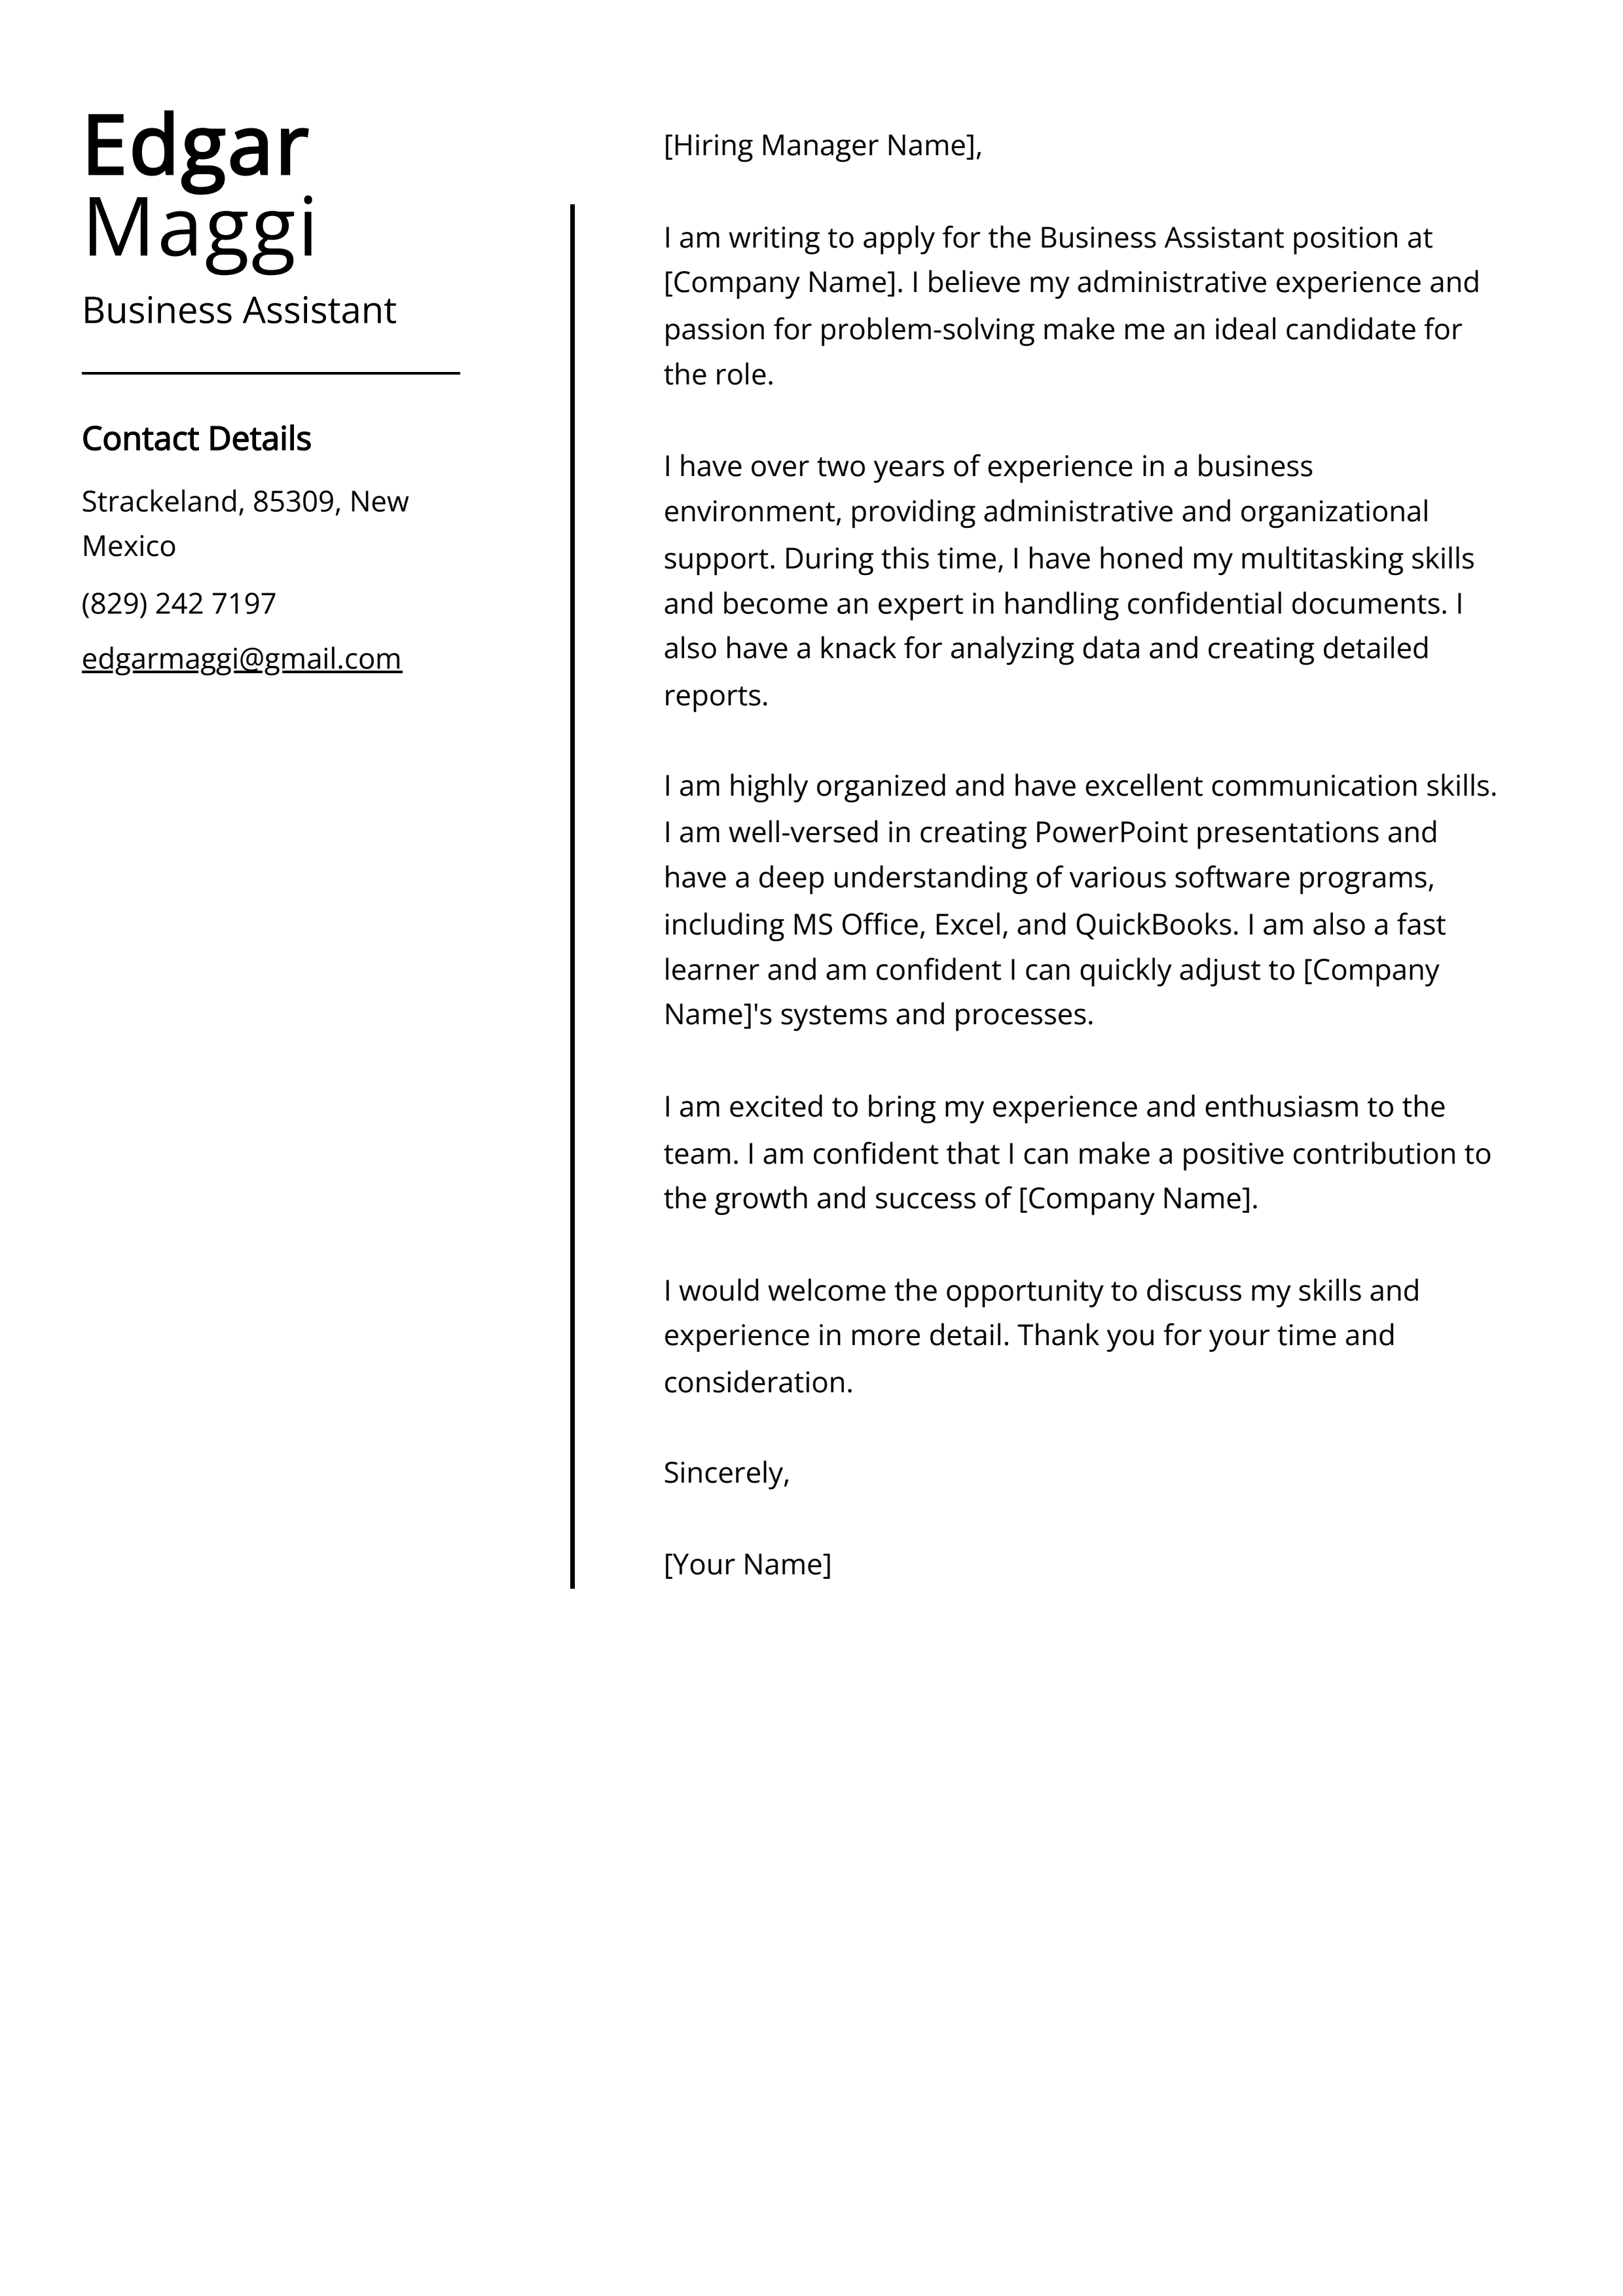 Business Assistant Cover Letter Example